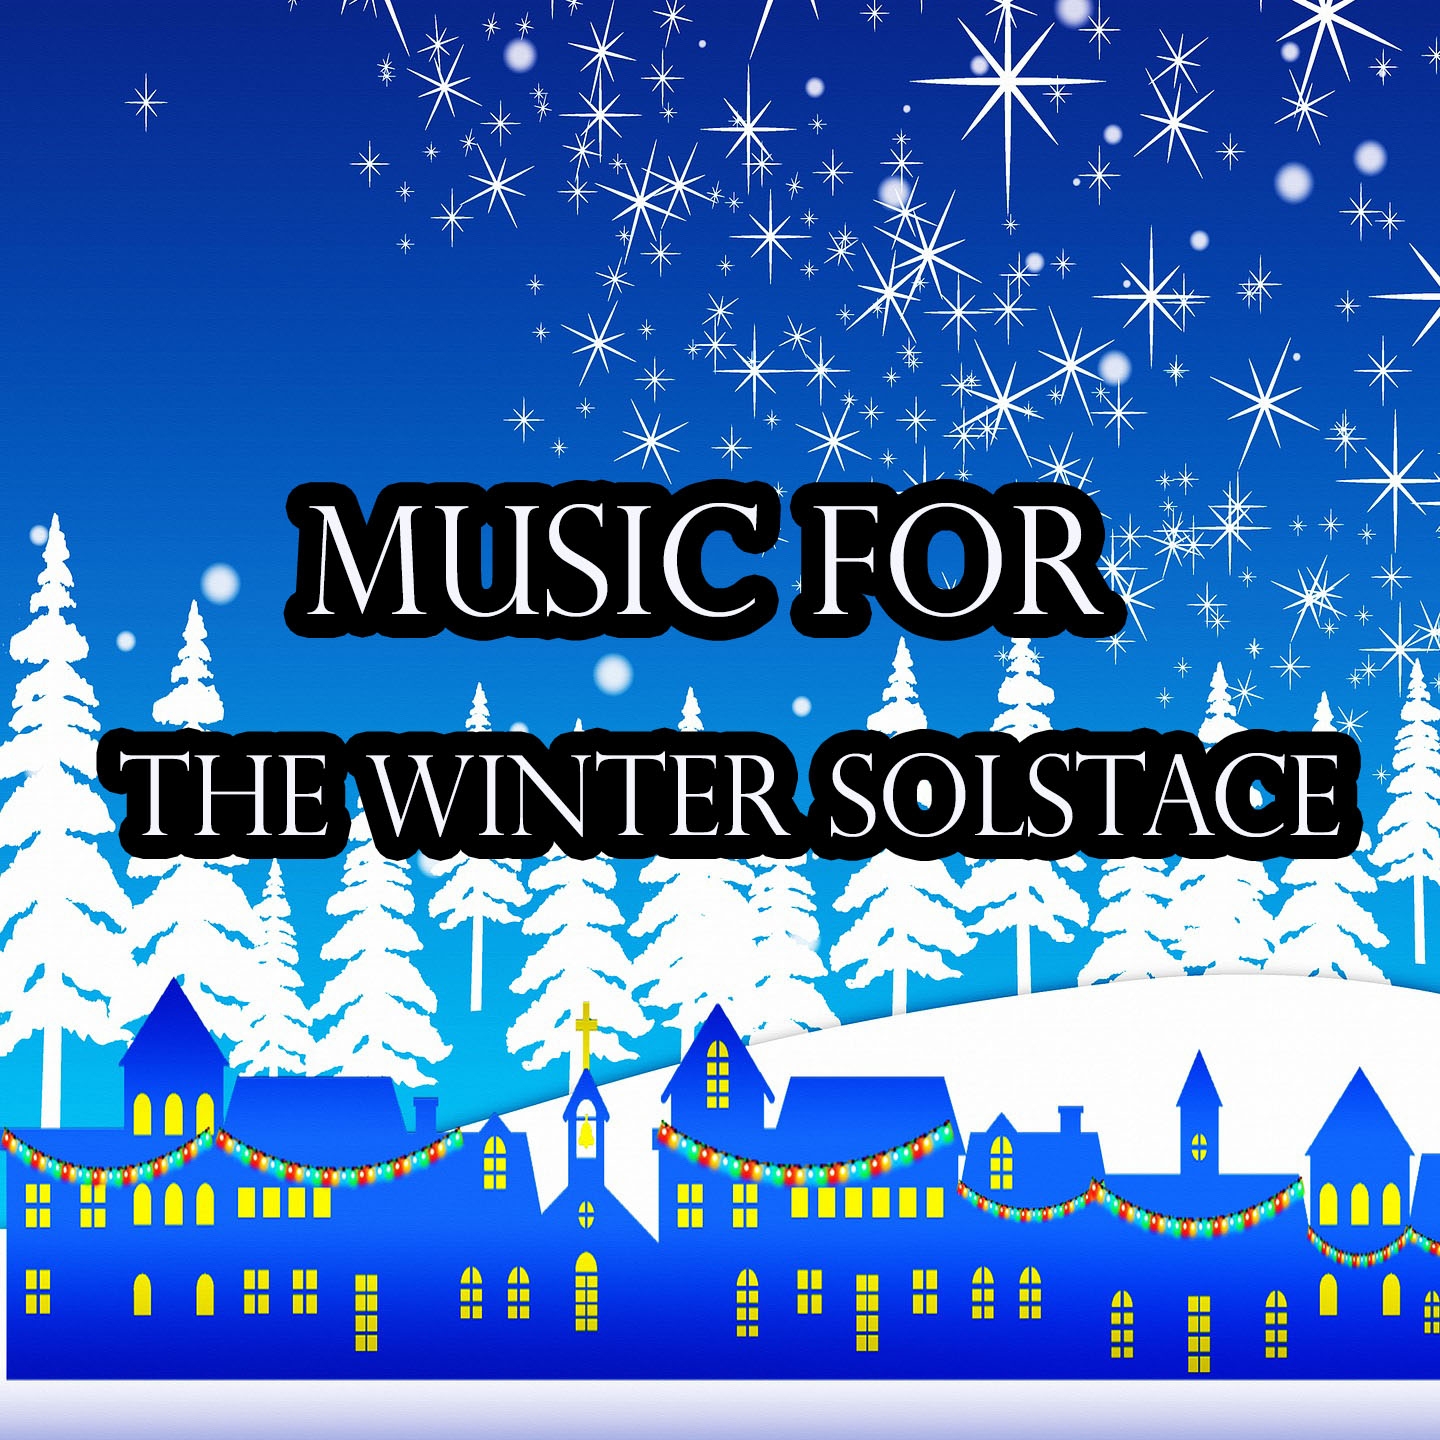 Music For The Winter Solstace